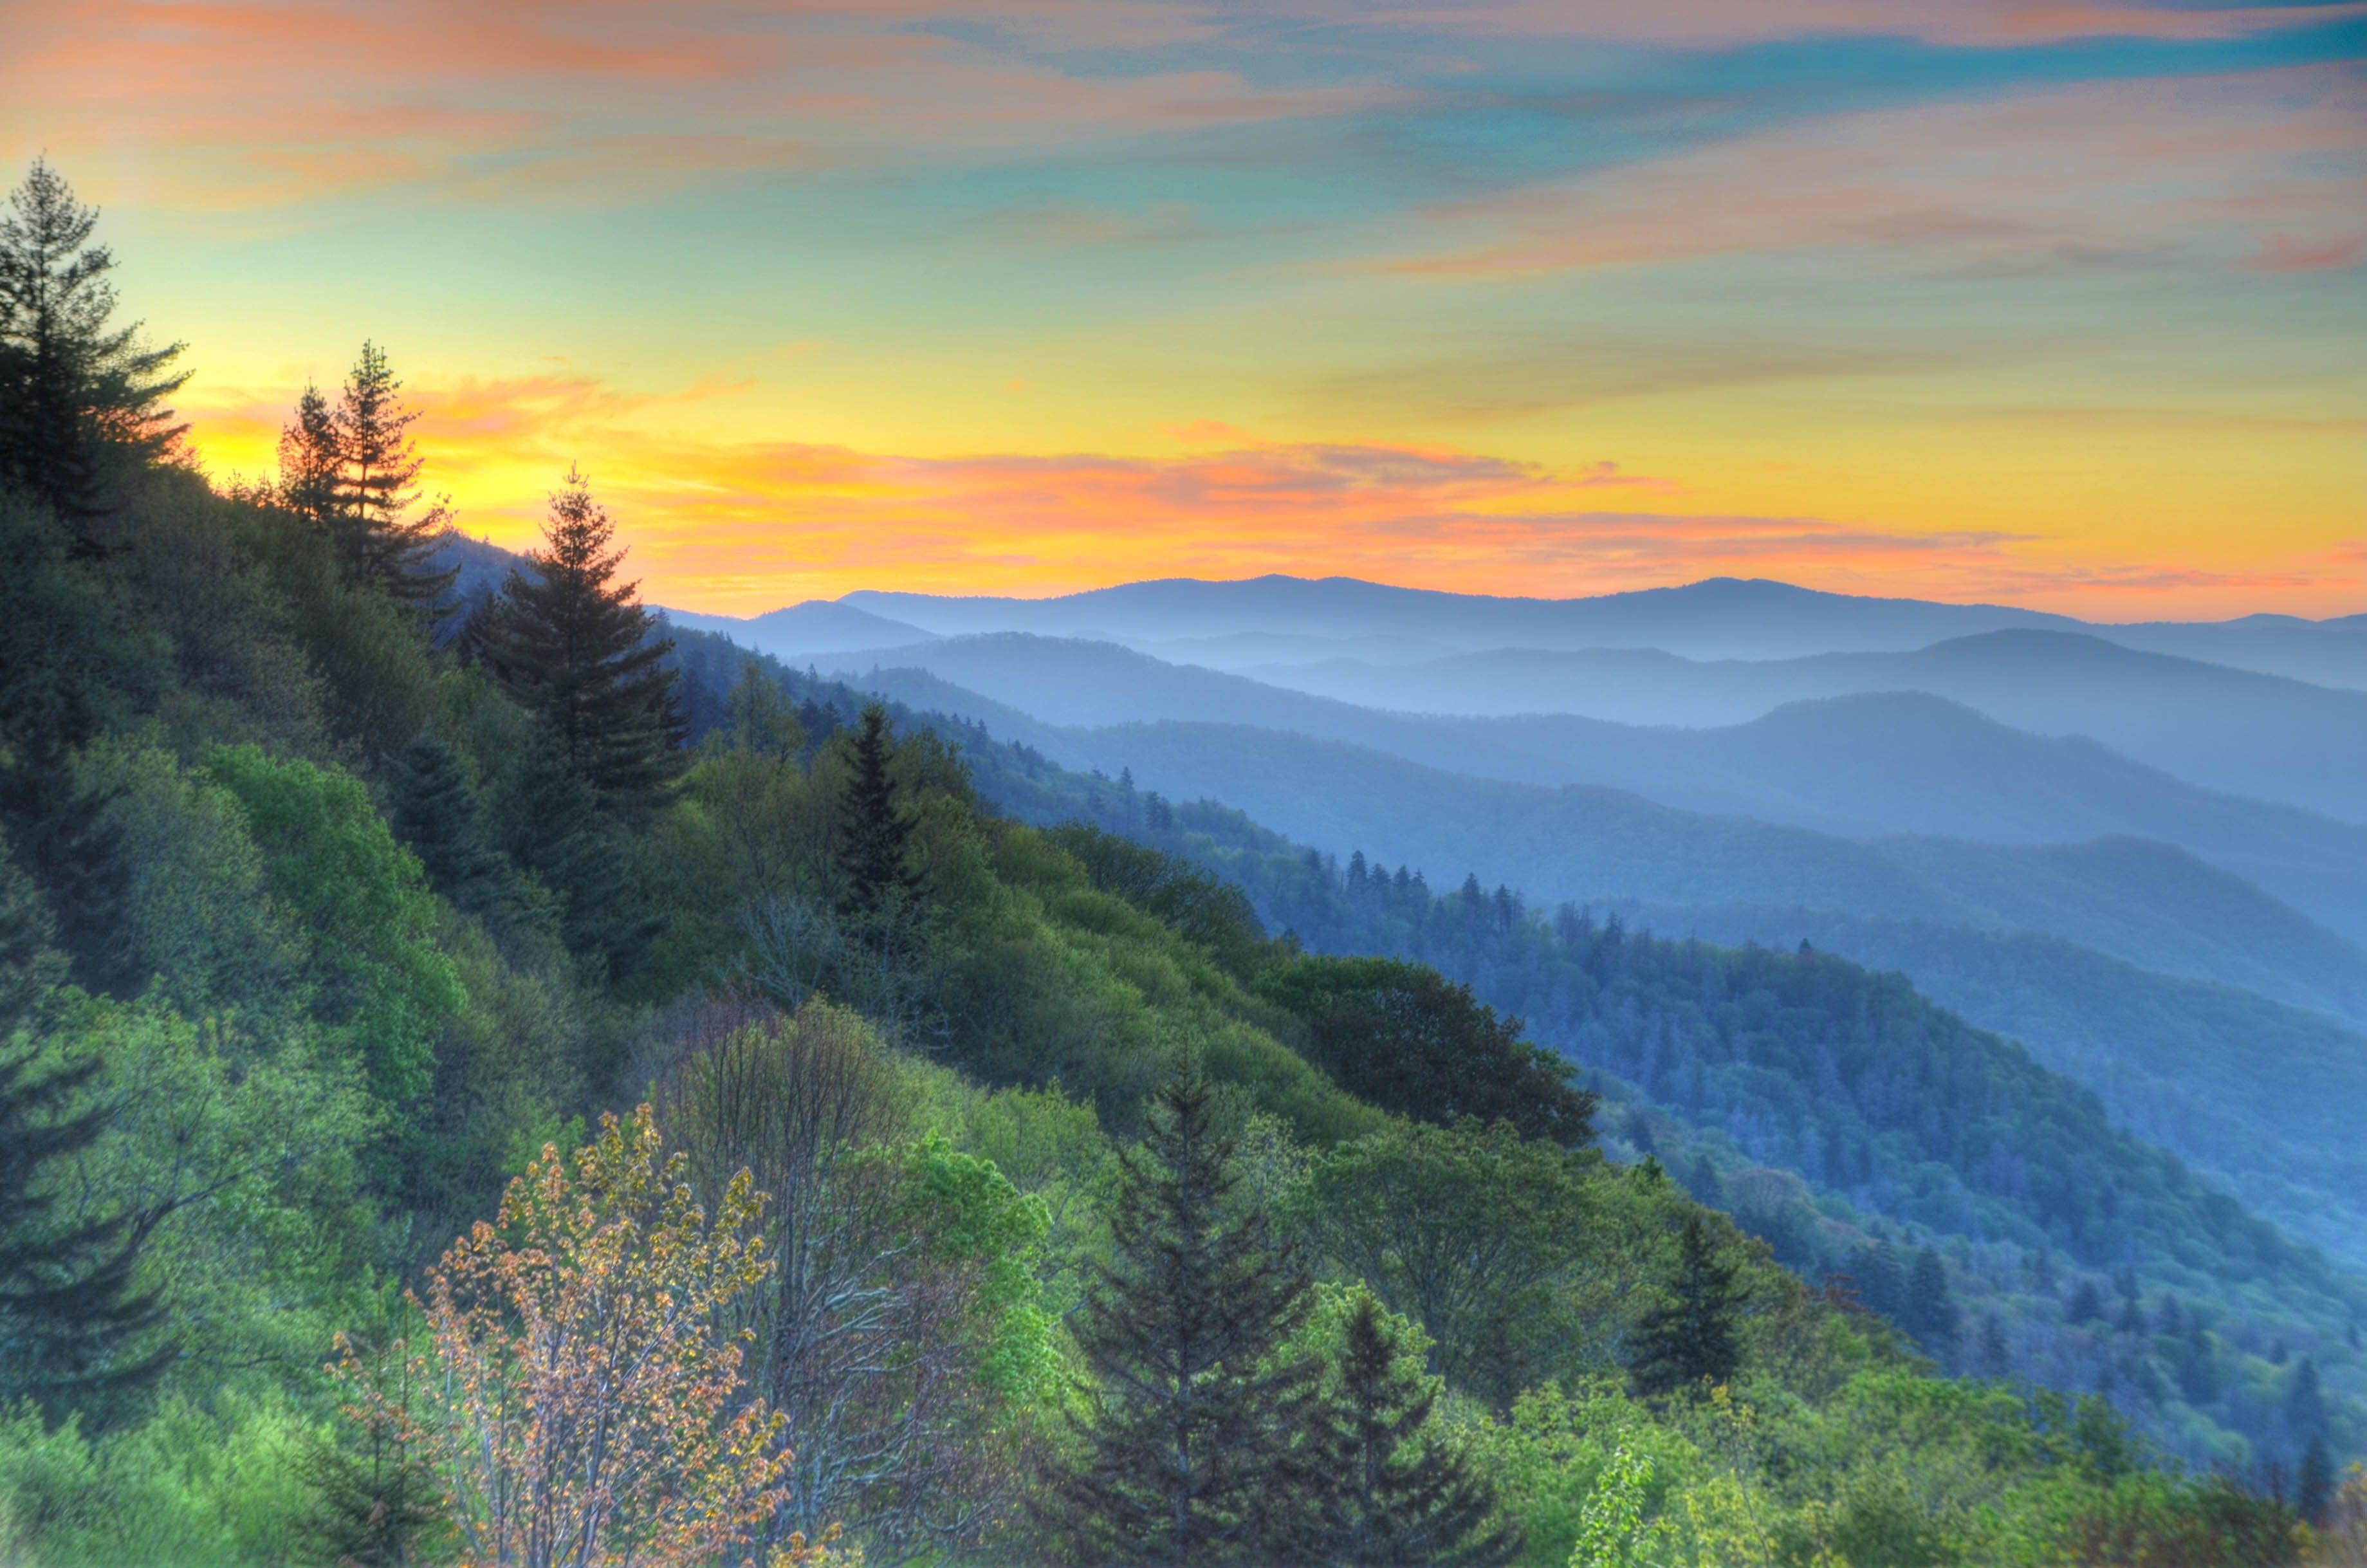 Sunrise at Oconaluftee Overlook in the Great Smoky Mountains